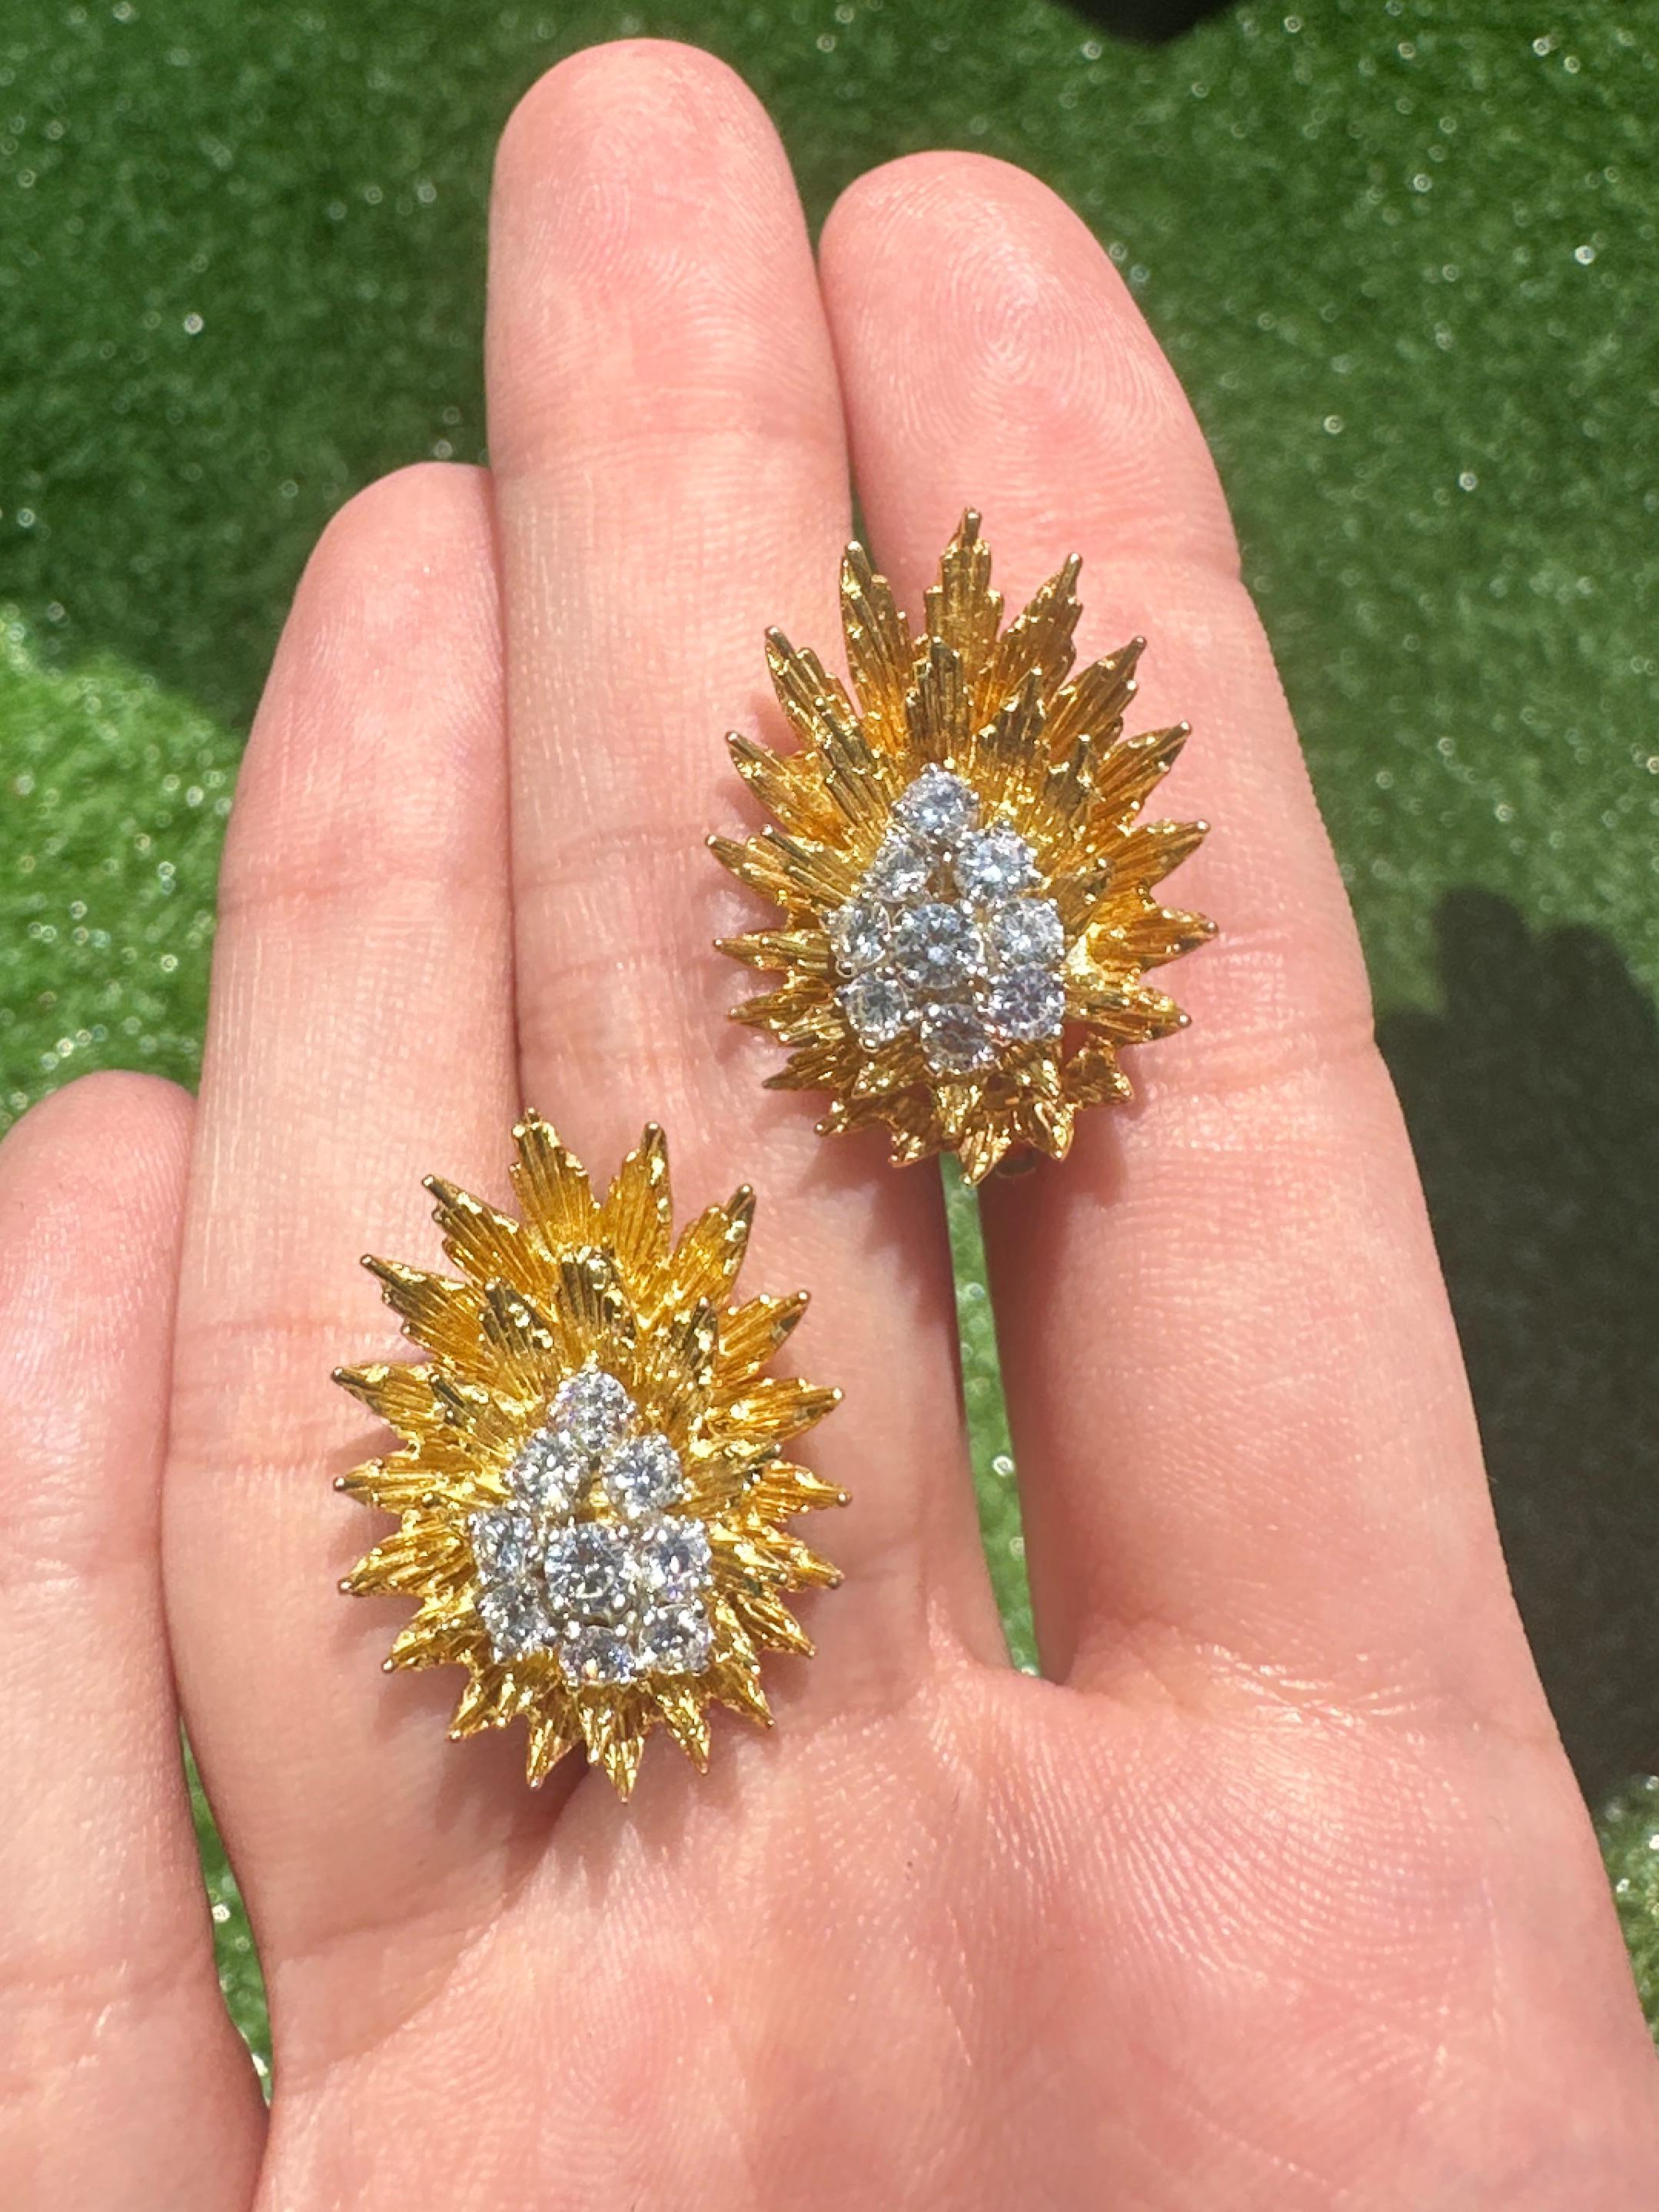 Elevate your style with these stunning 18k Estate Diamond Earrings Signed Yard. Crafted with 1.20 carats of dazzling diamonds and 18k yellow gold, these 1960's earrings exude elegance and luxury. Lightweight at 19.4 grams, they are easy to wear and